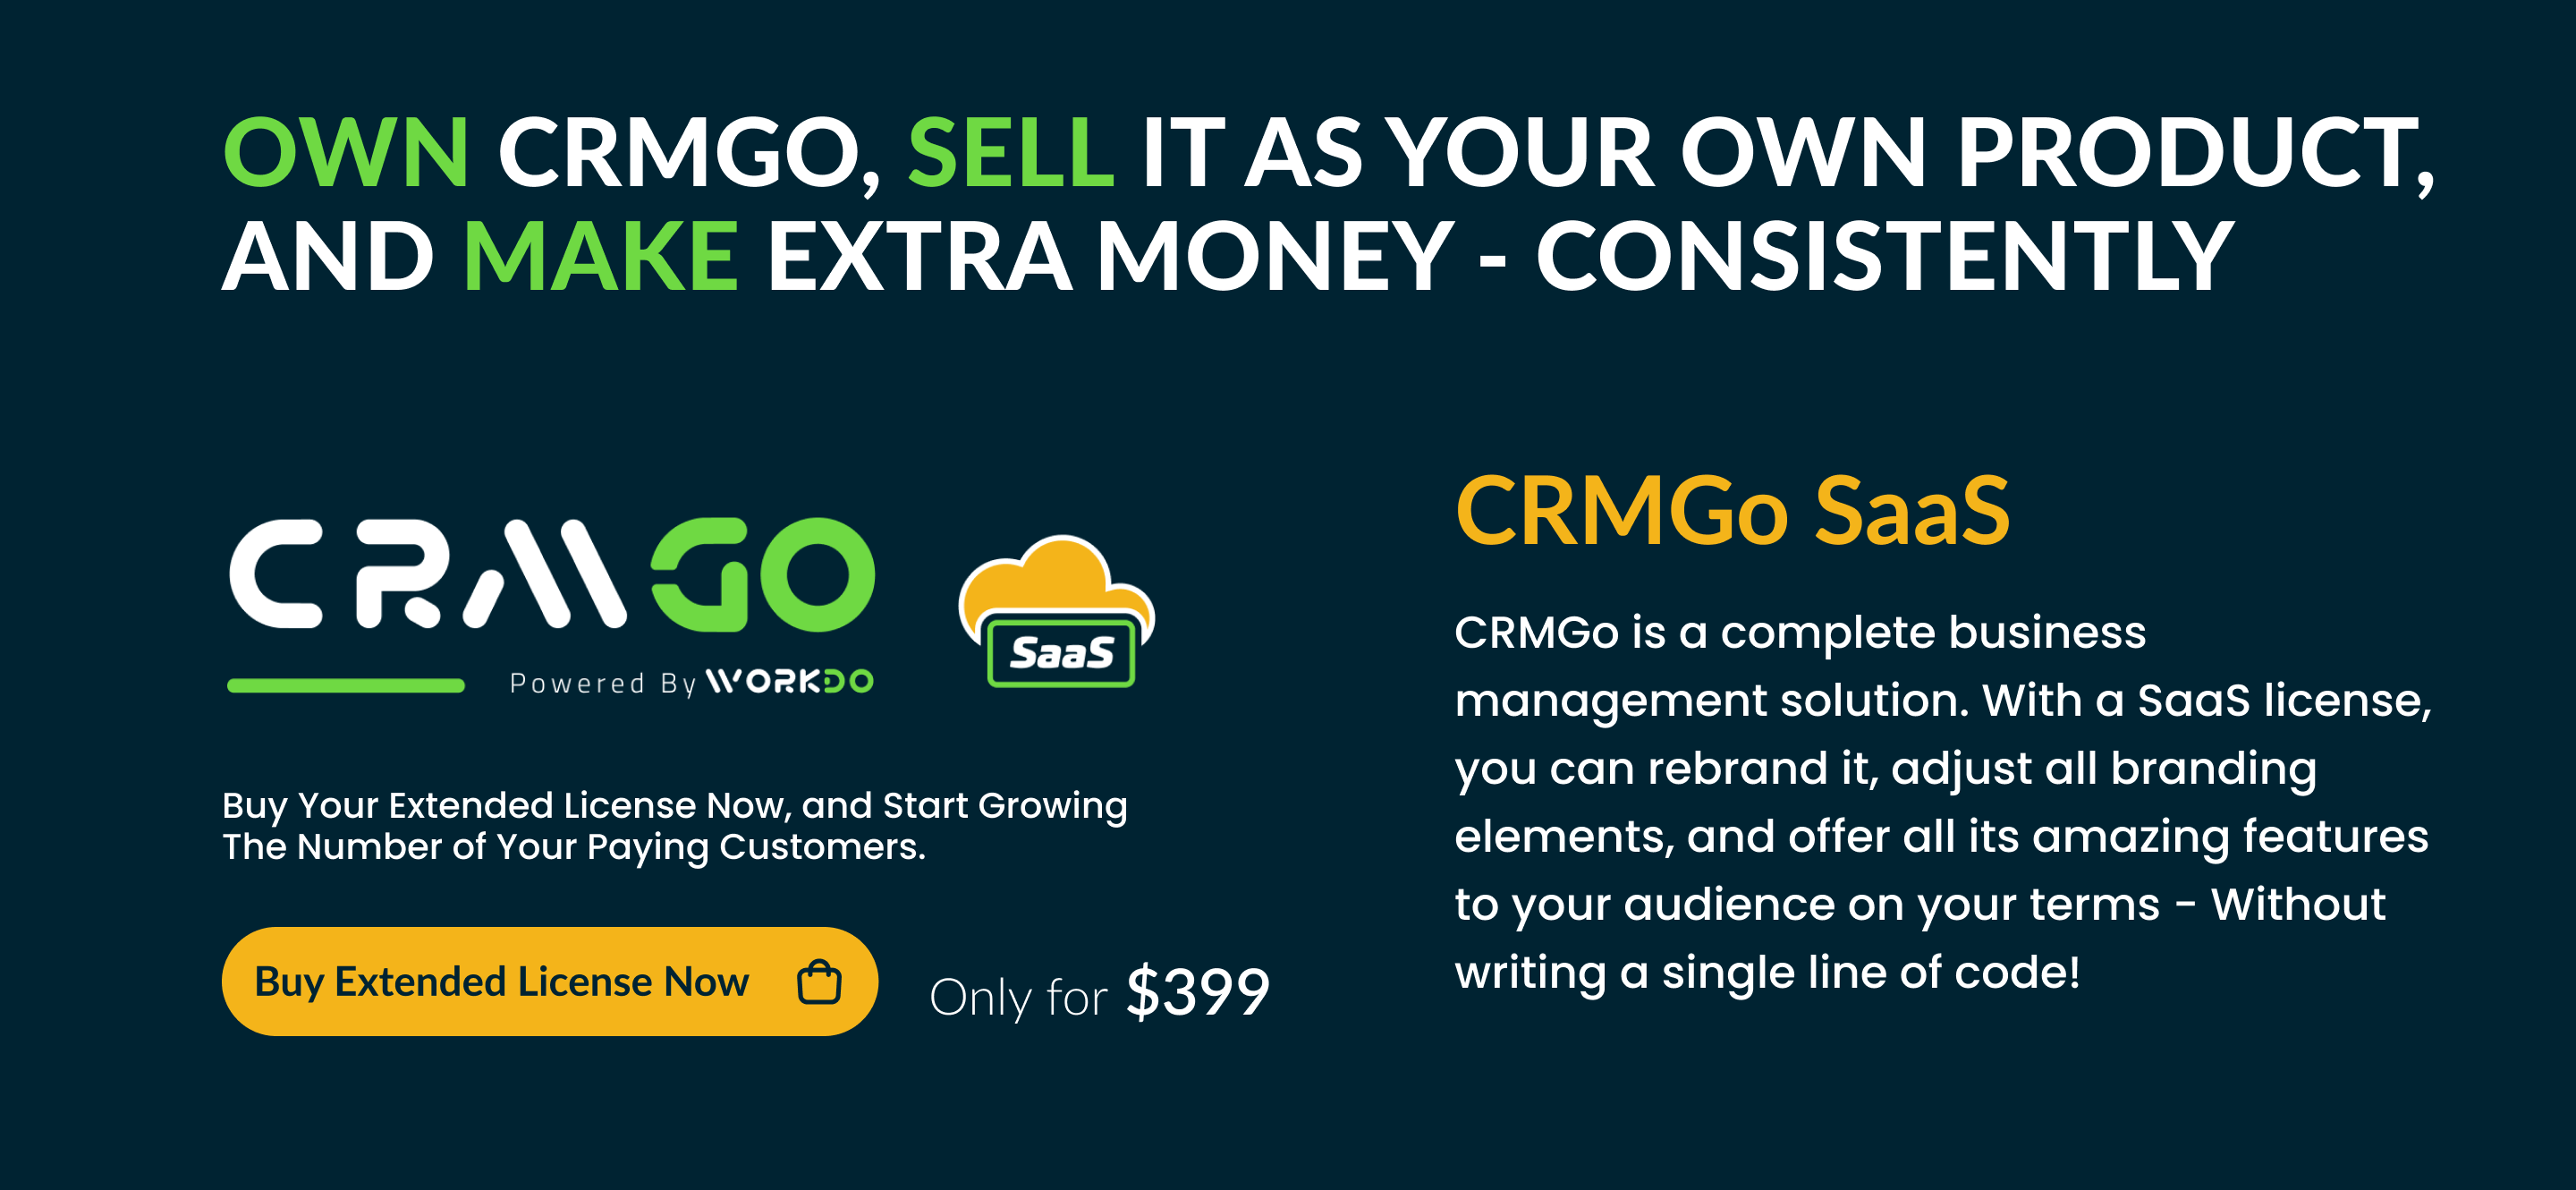 CRMGo SaaS - Projects, Accounting, Leads, Deals & HRM Tool - 7